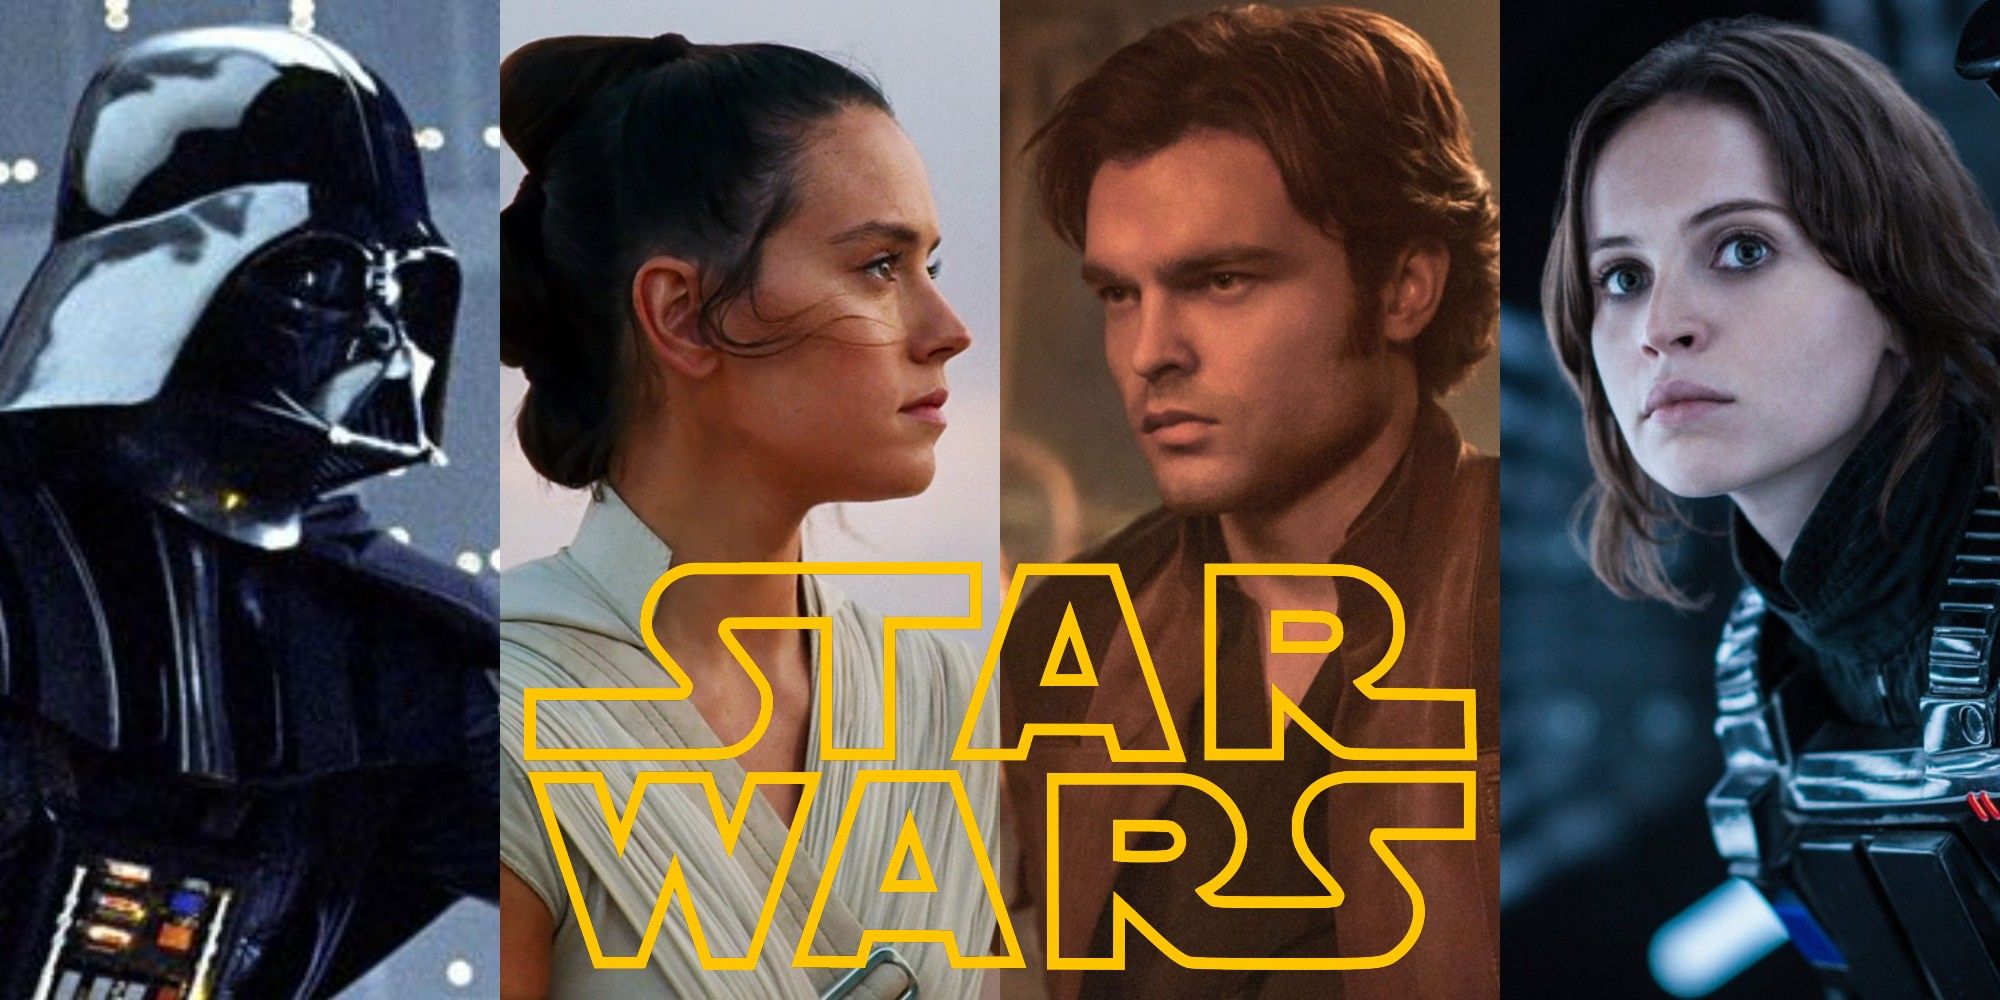 Live-Action Star Wars Movies (So Far), Ranked From Shortest To Longest Runtime